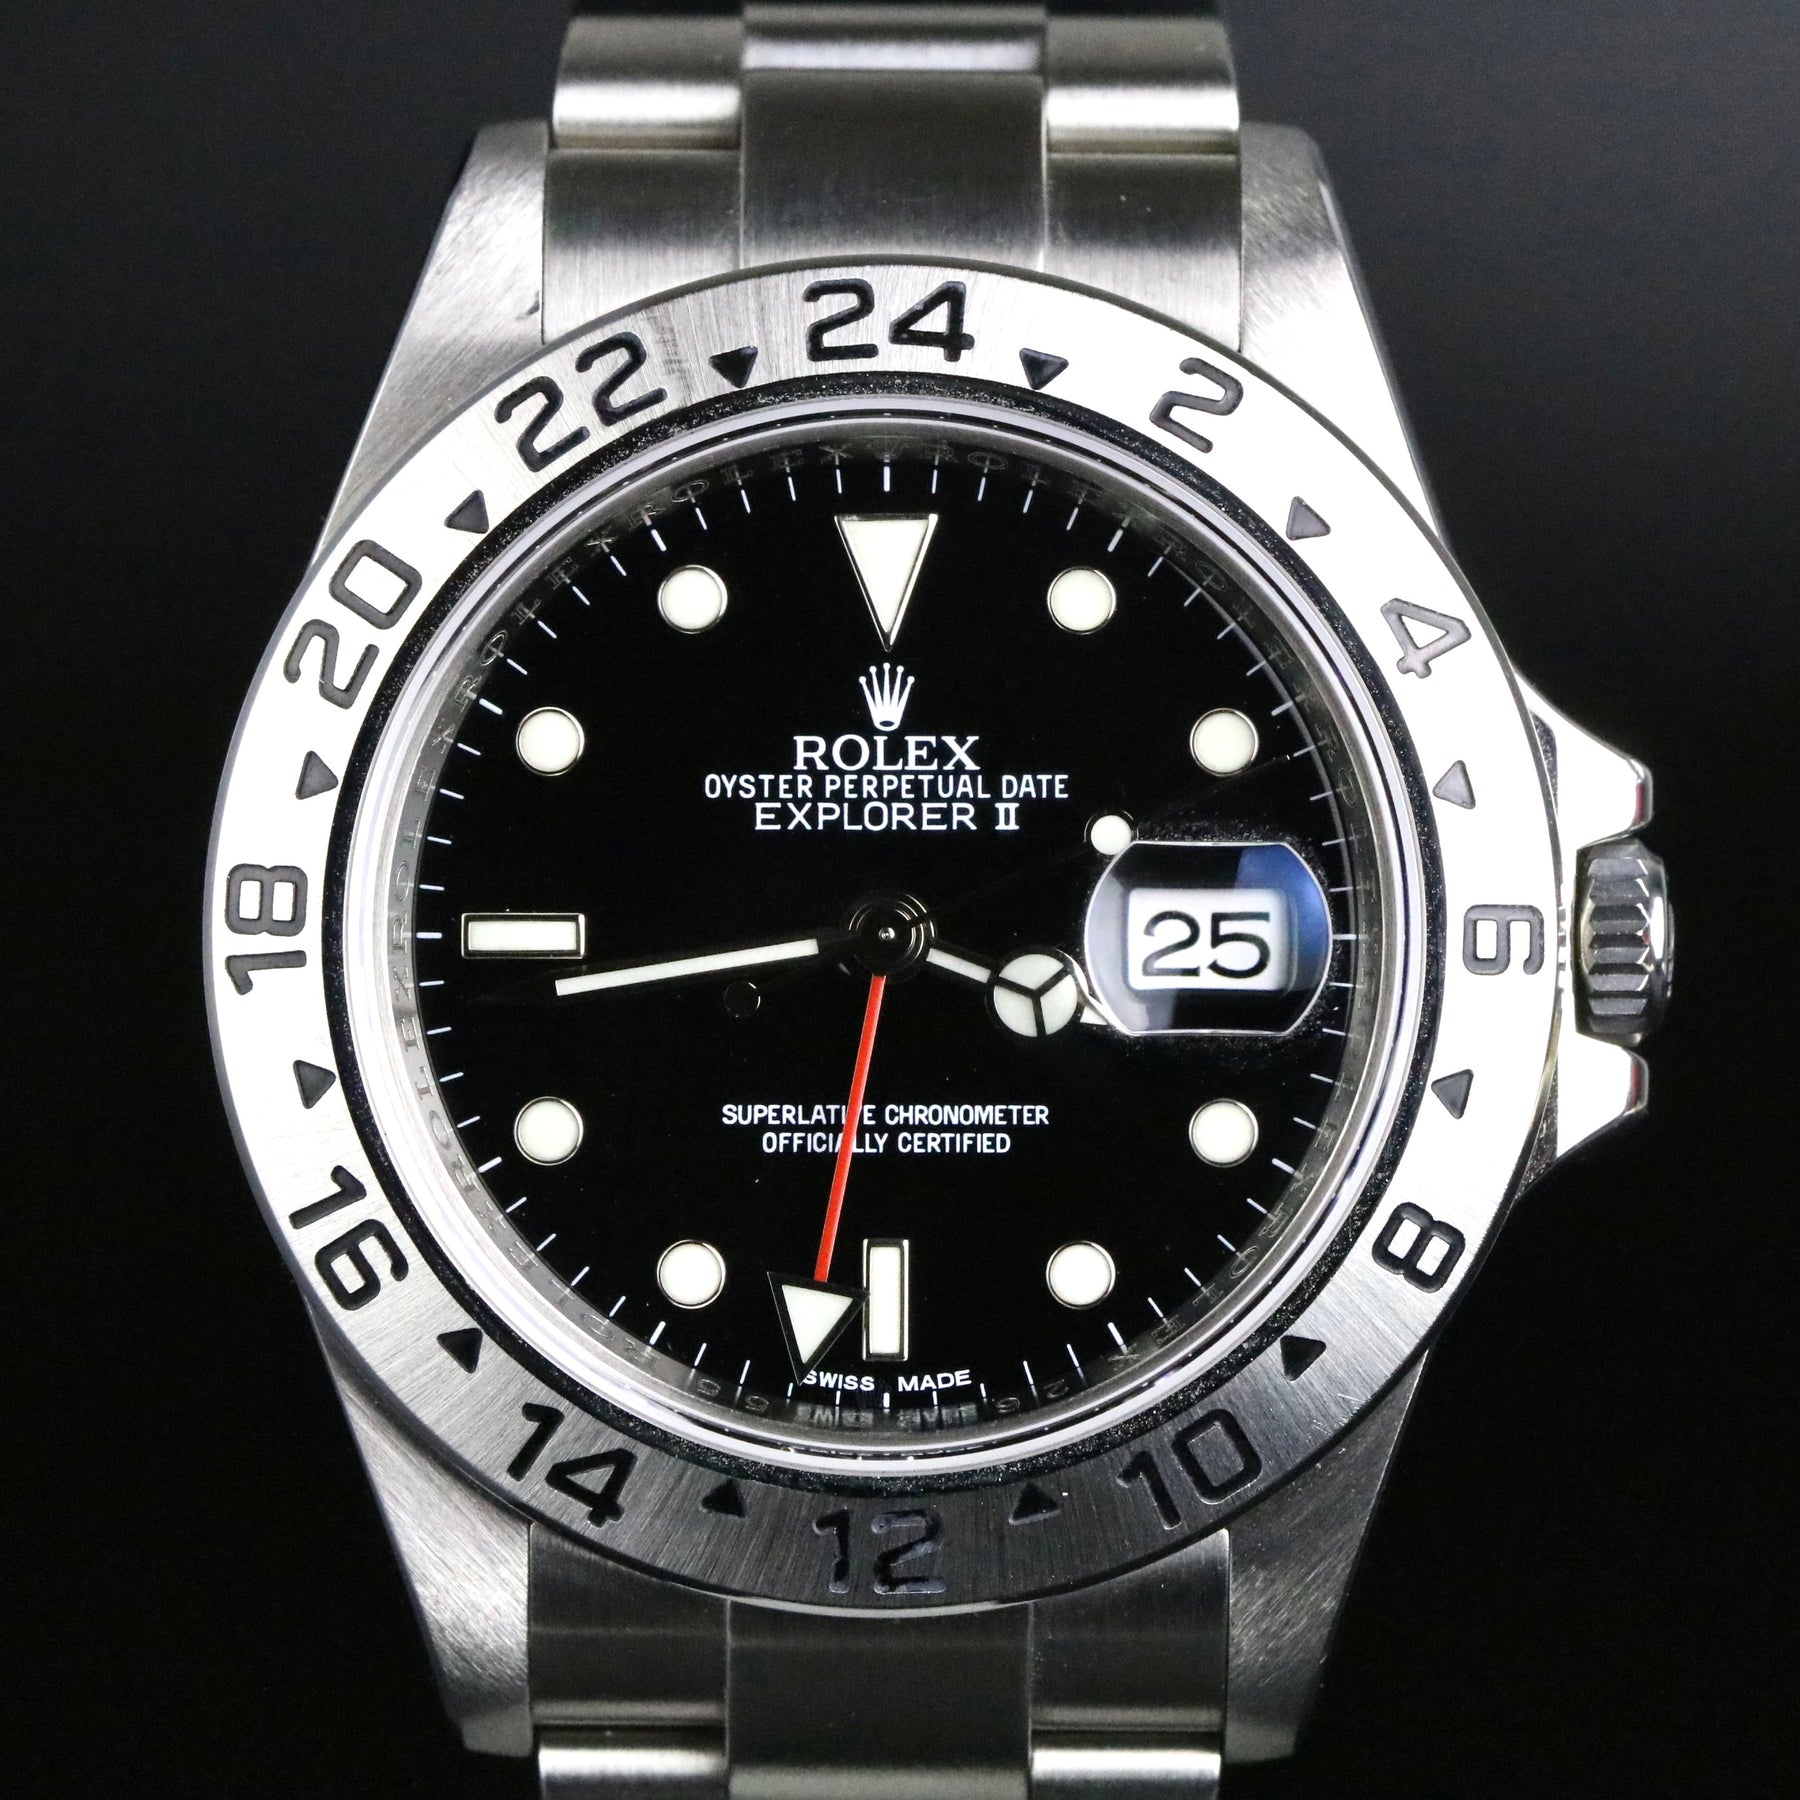 2012 Rolex 16570 Explorer II Black Dial 3186 Movement with Box & Papers